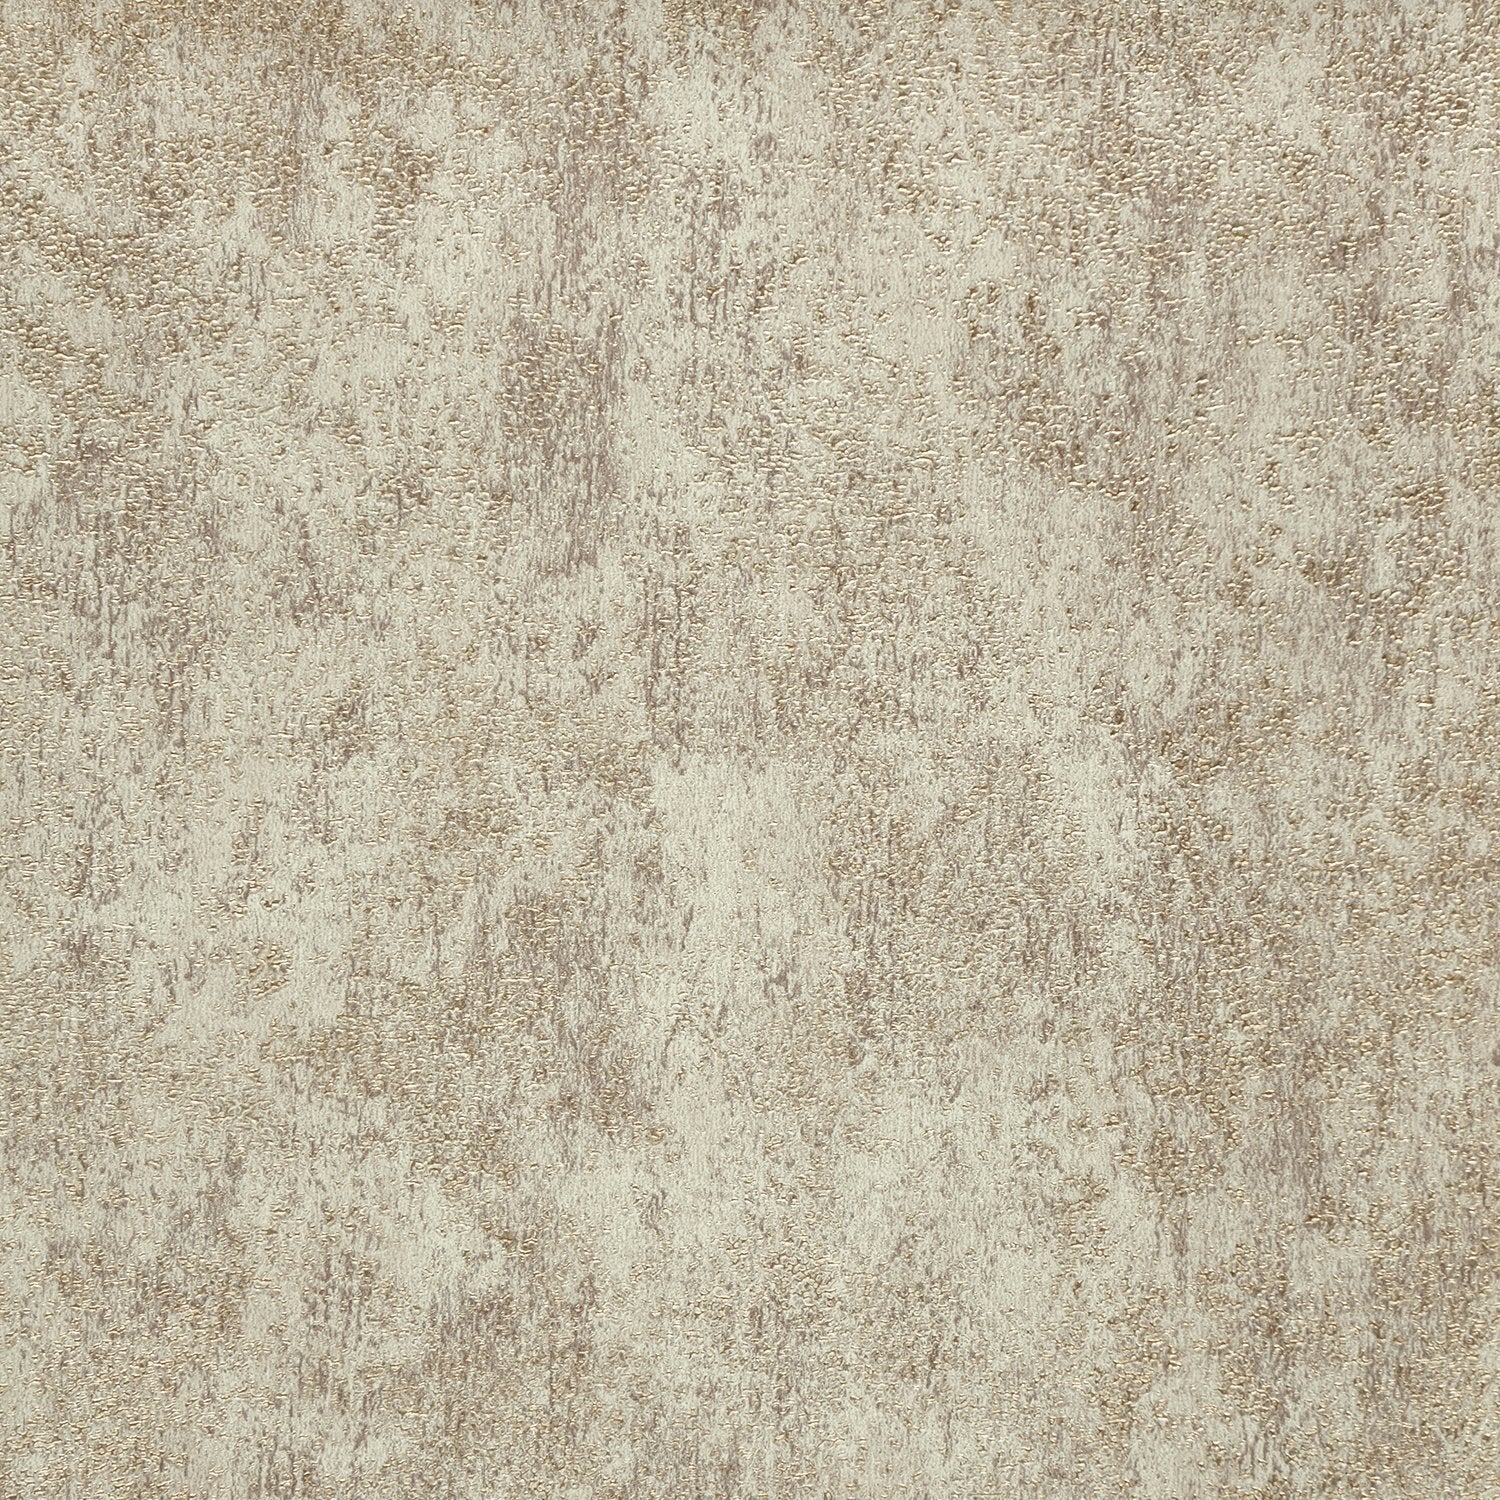 Patina Stone - Y47488 - Wallcovering - Vycon - Kube Contract